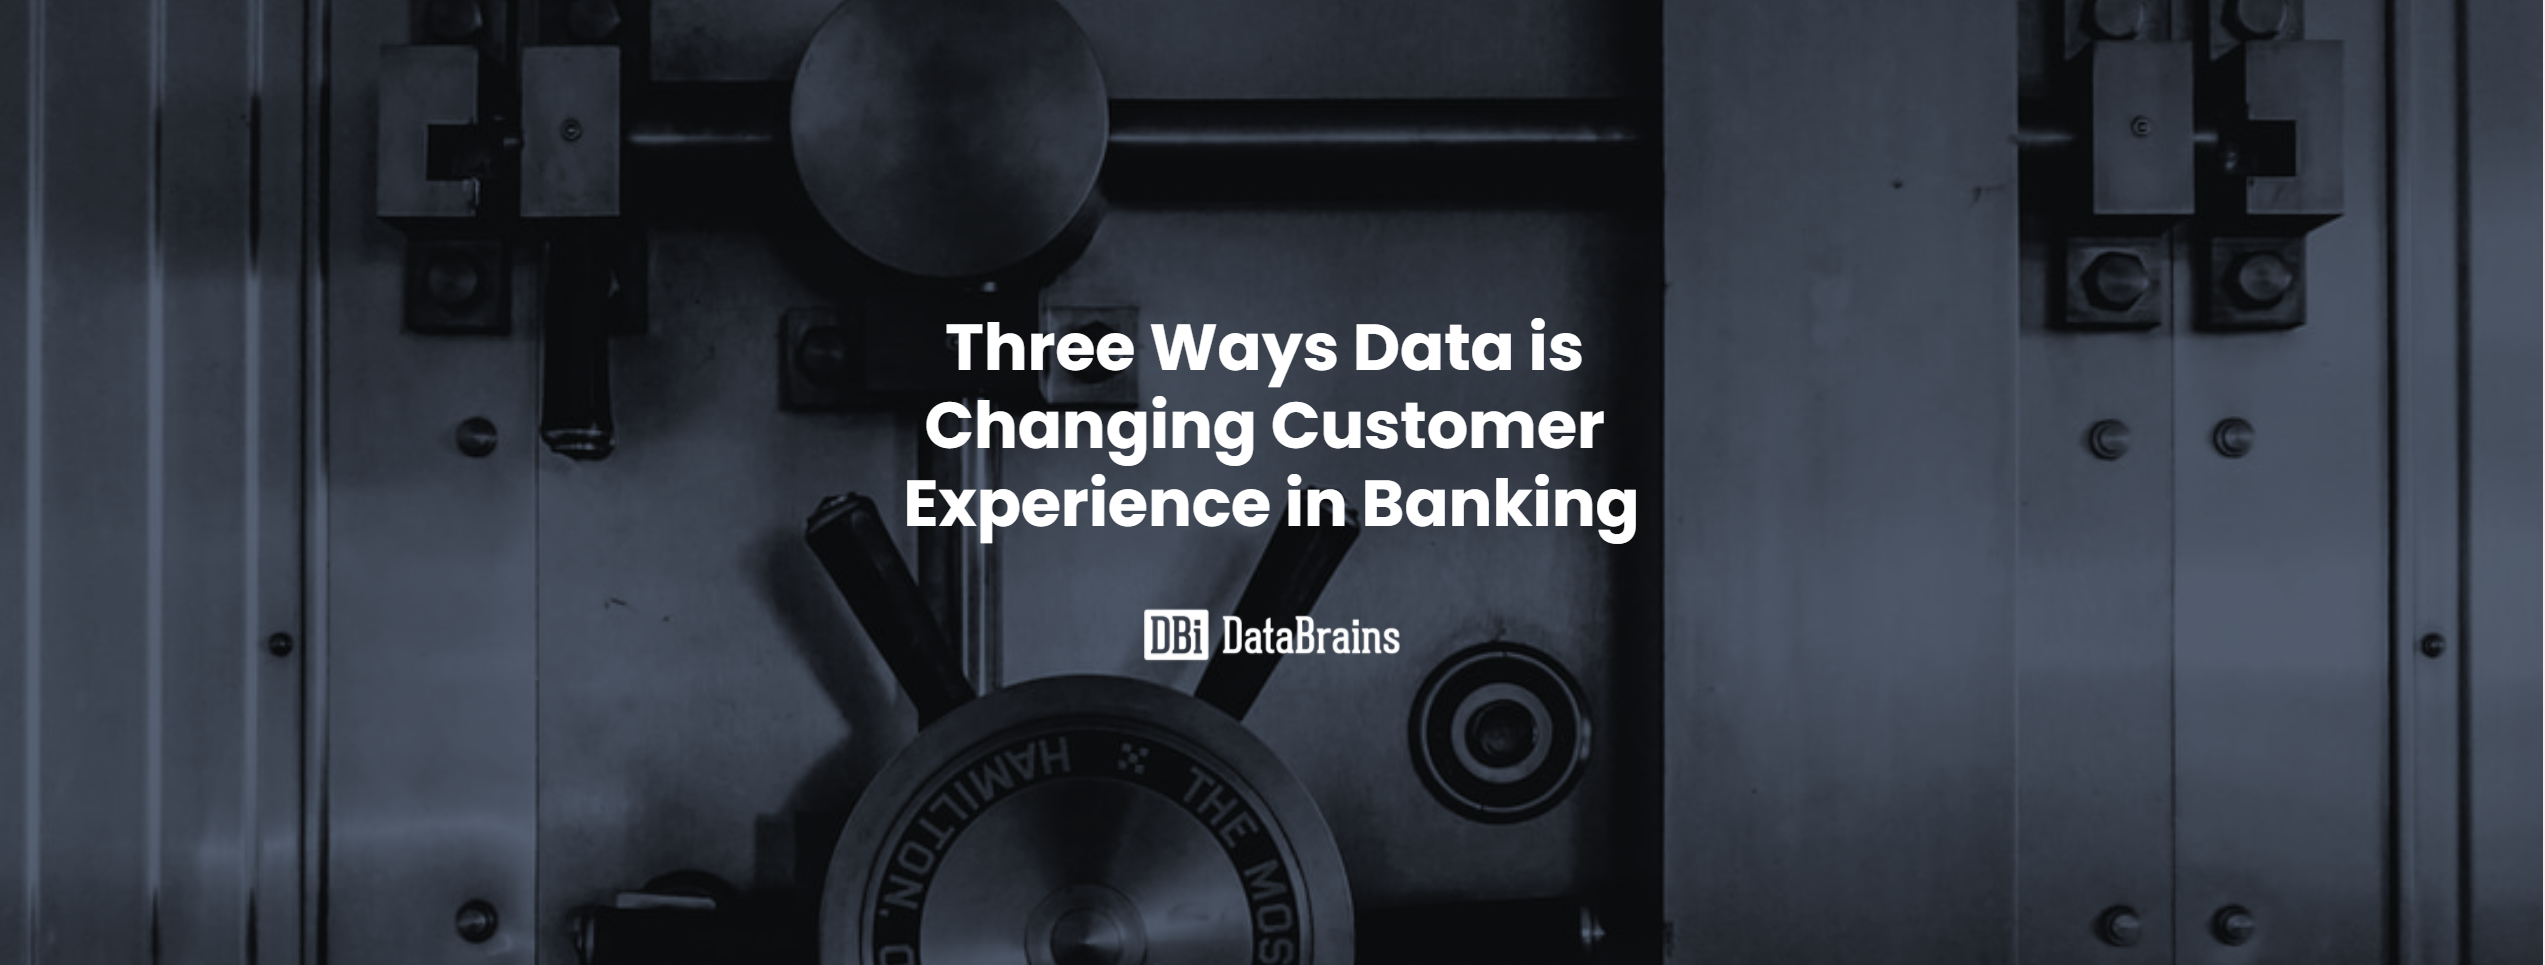 Three Ways Data is Changing Customer Experience in Banking